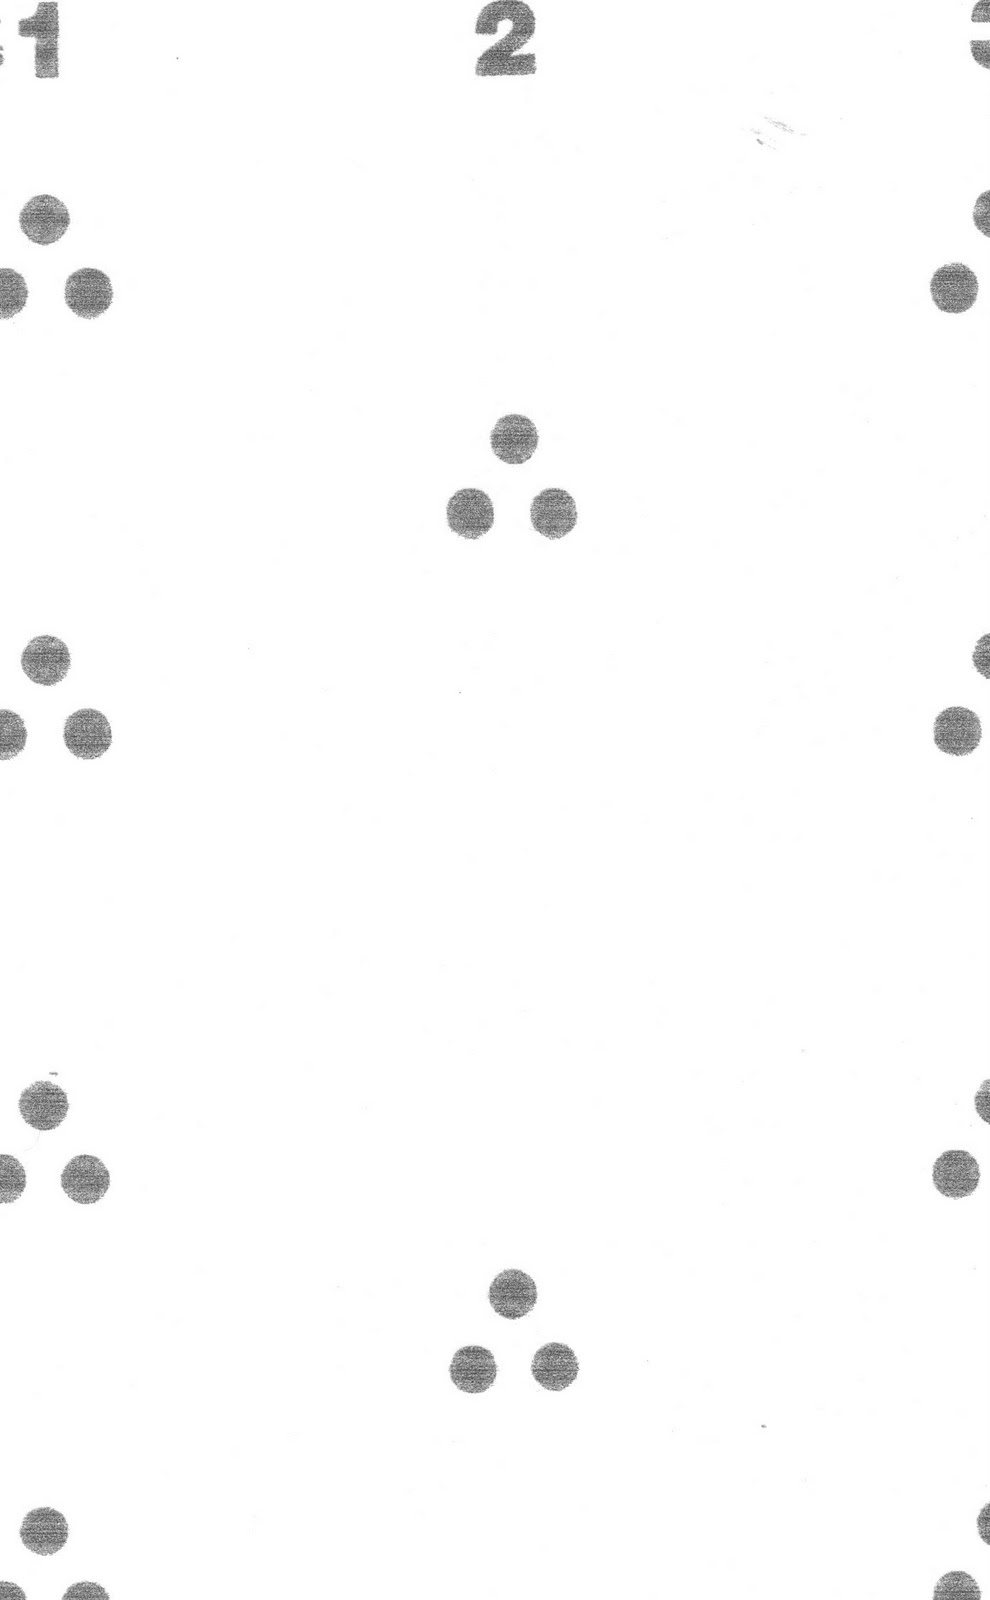 ten dot sets are printed on each target each dot set looks like a ...